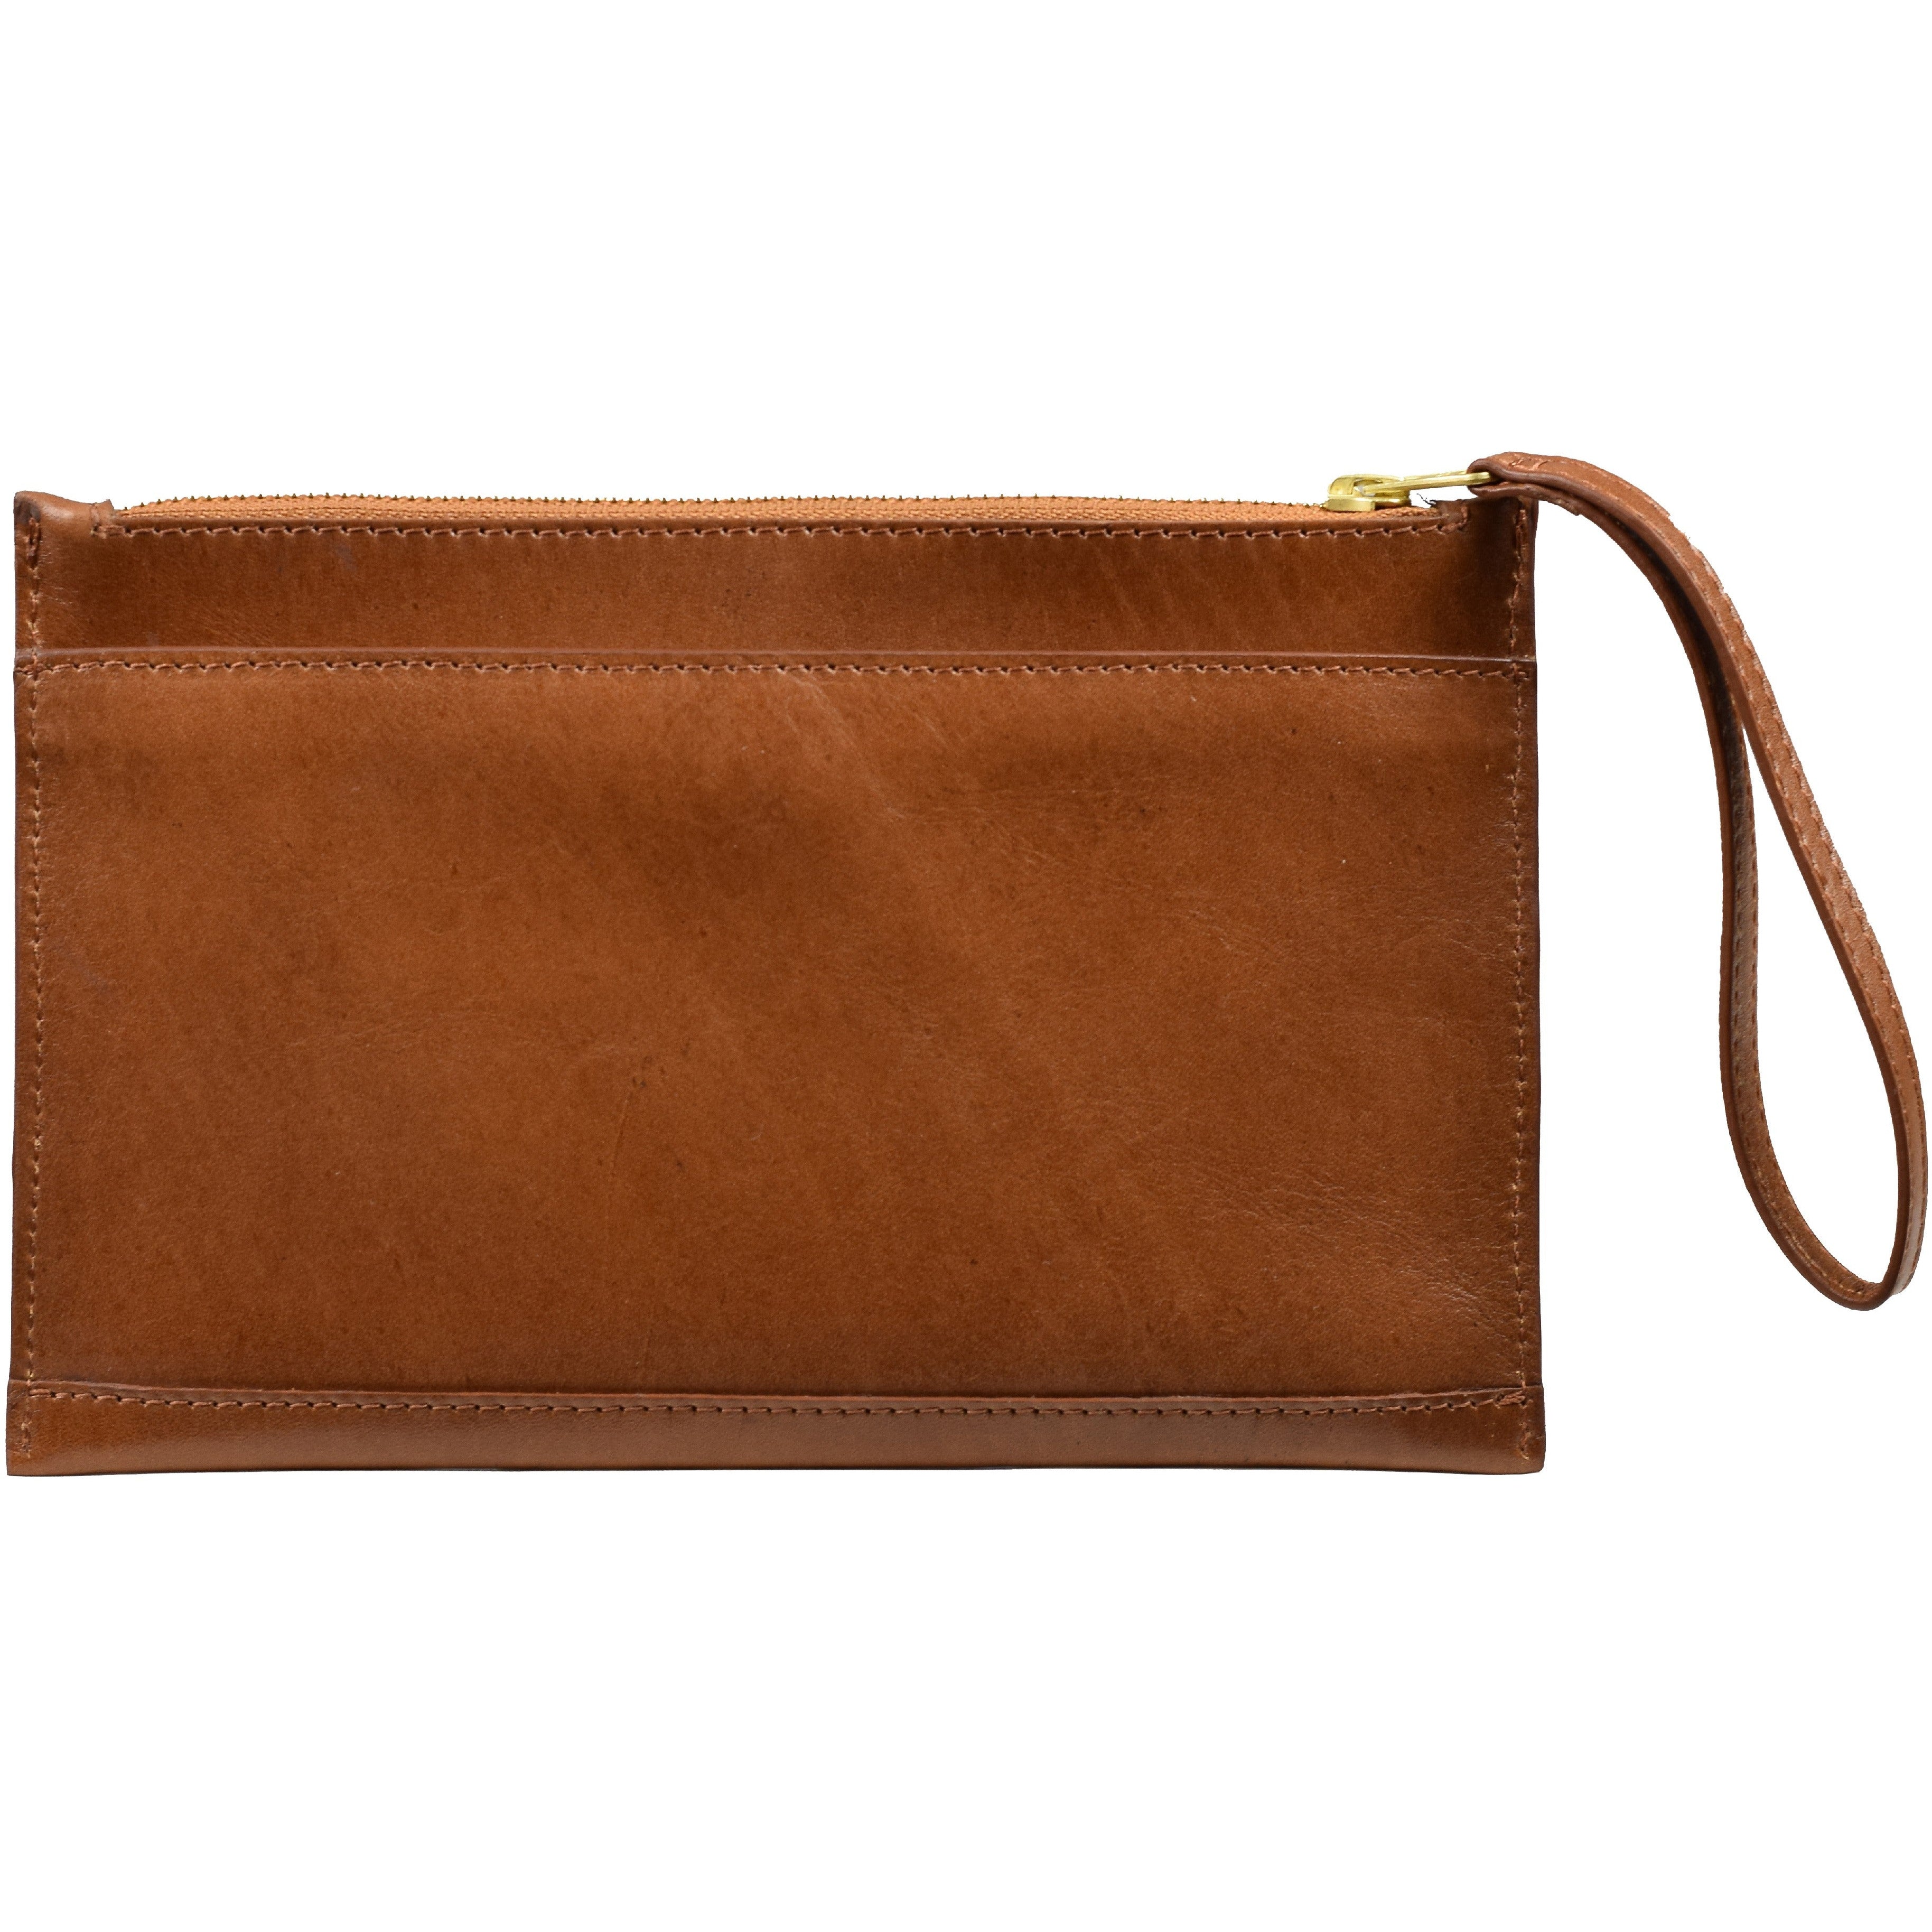 Limited All Day Wristlet - LAND Leather Goods